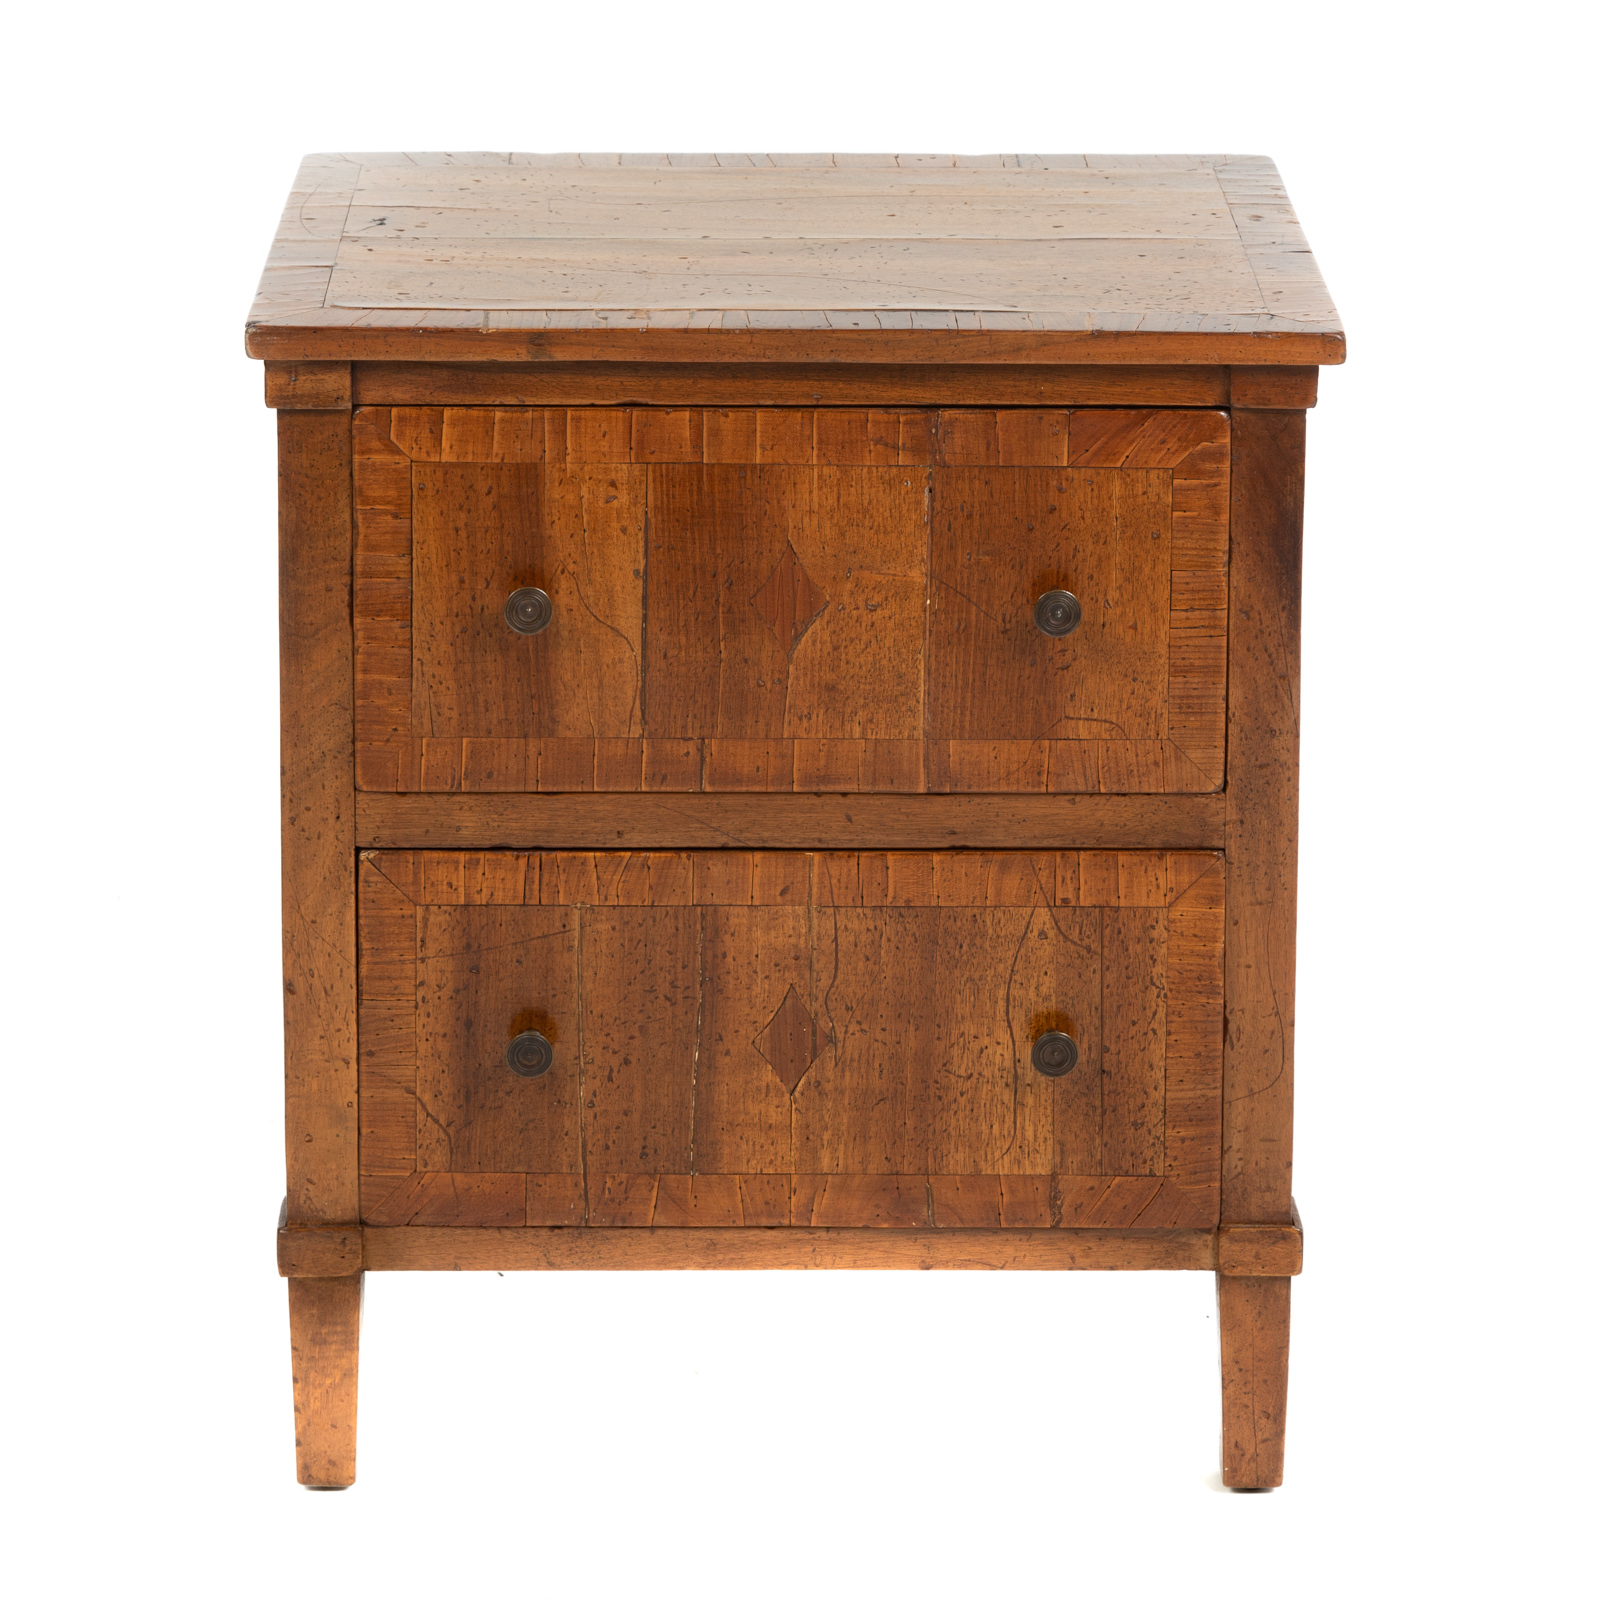 BURLED WOOD DIMINUTIVE CHEST Late 36a9ee